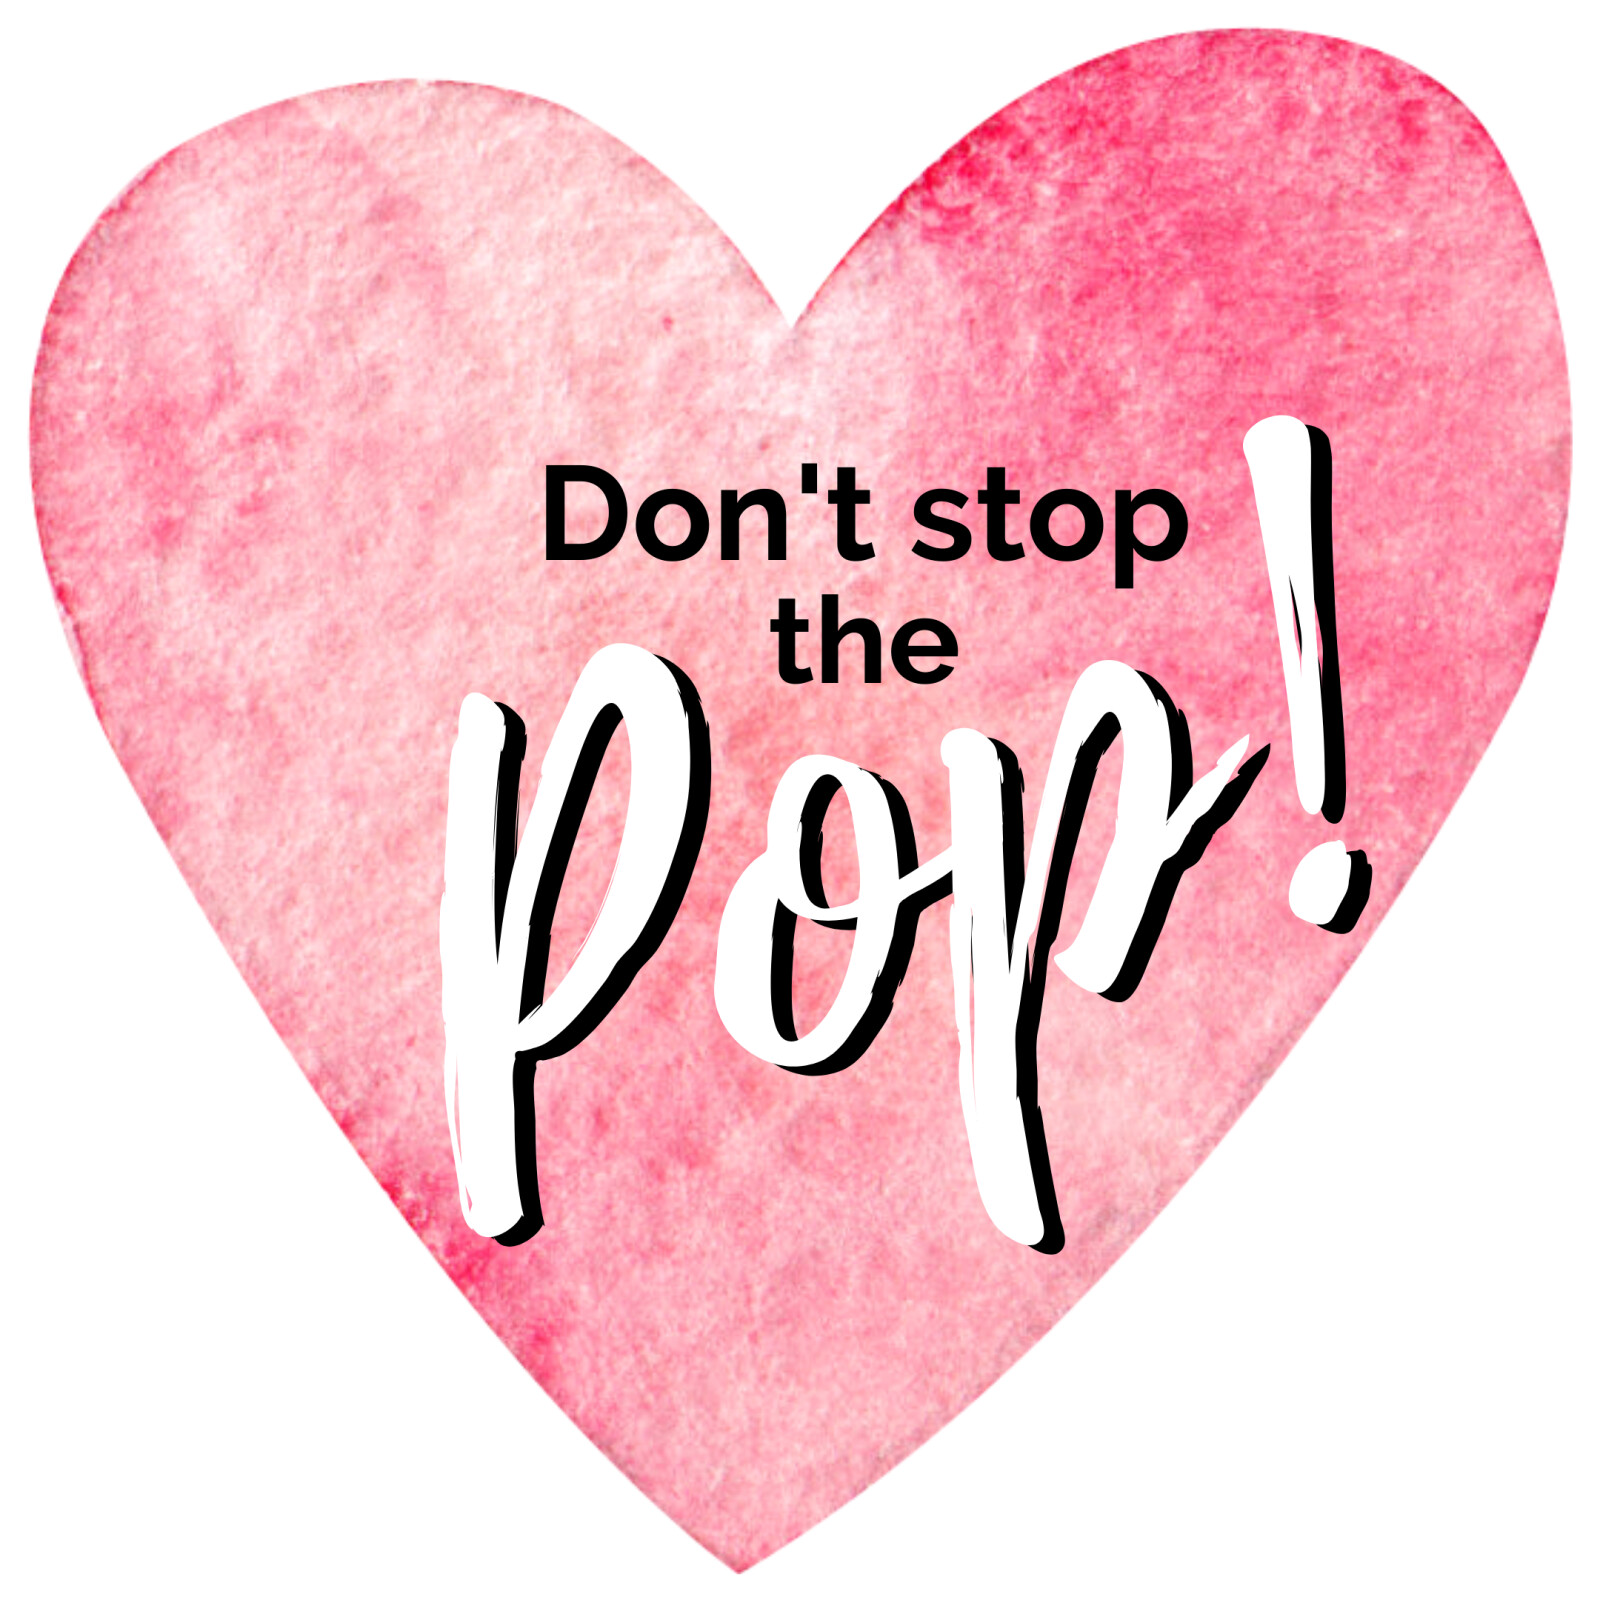 Don't Stop the Pop!